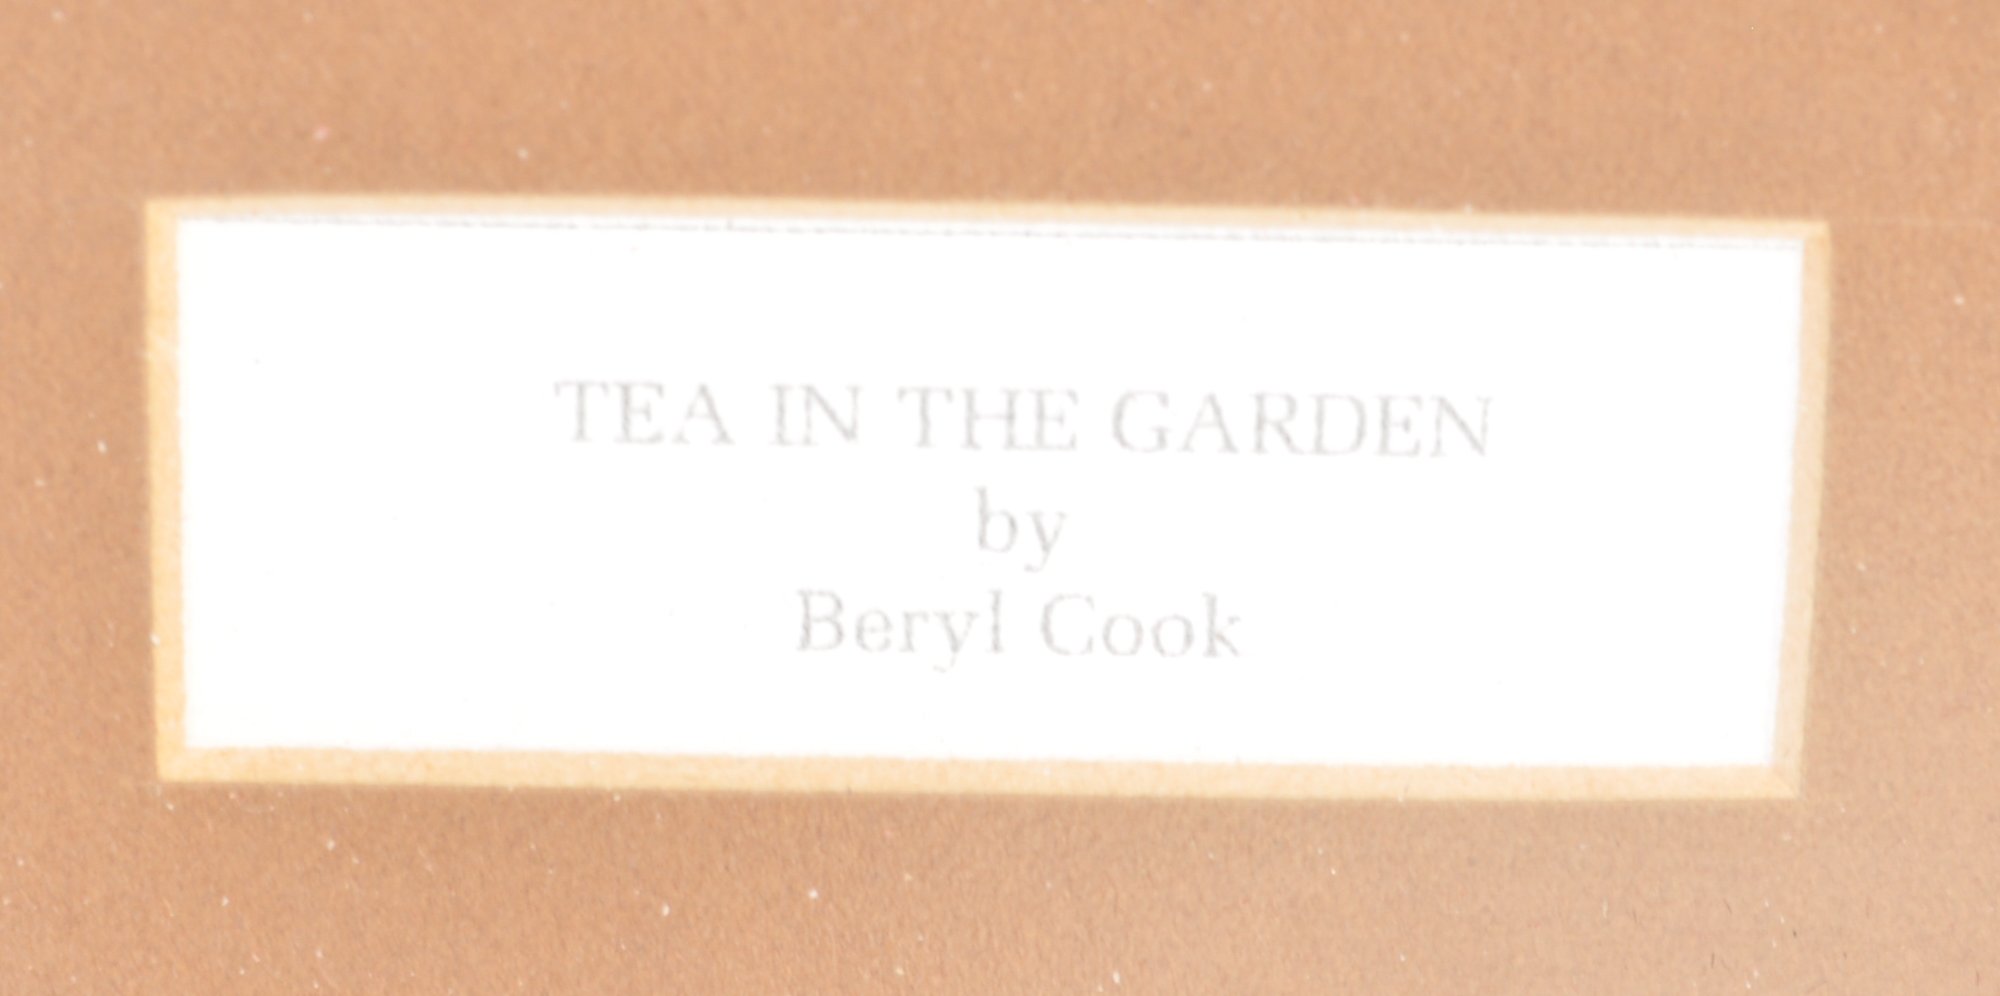 BERYL COOK - TEA IN THE GARDEN - FRAMED LITHOGRAPHIC PRINT - Image 4 of 5